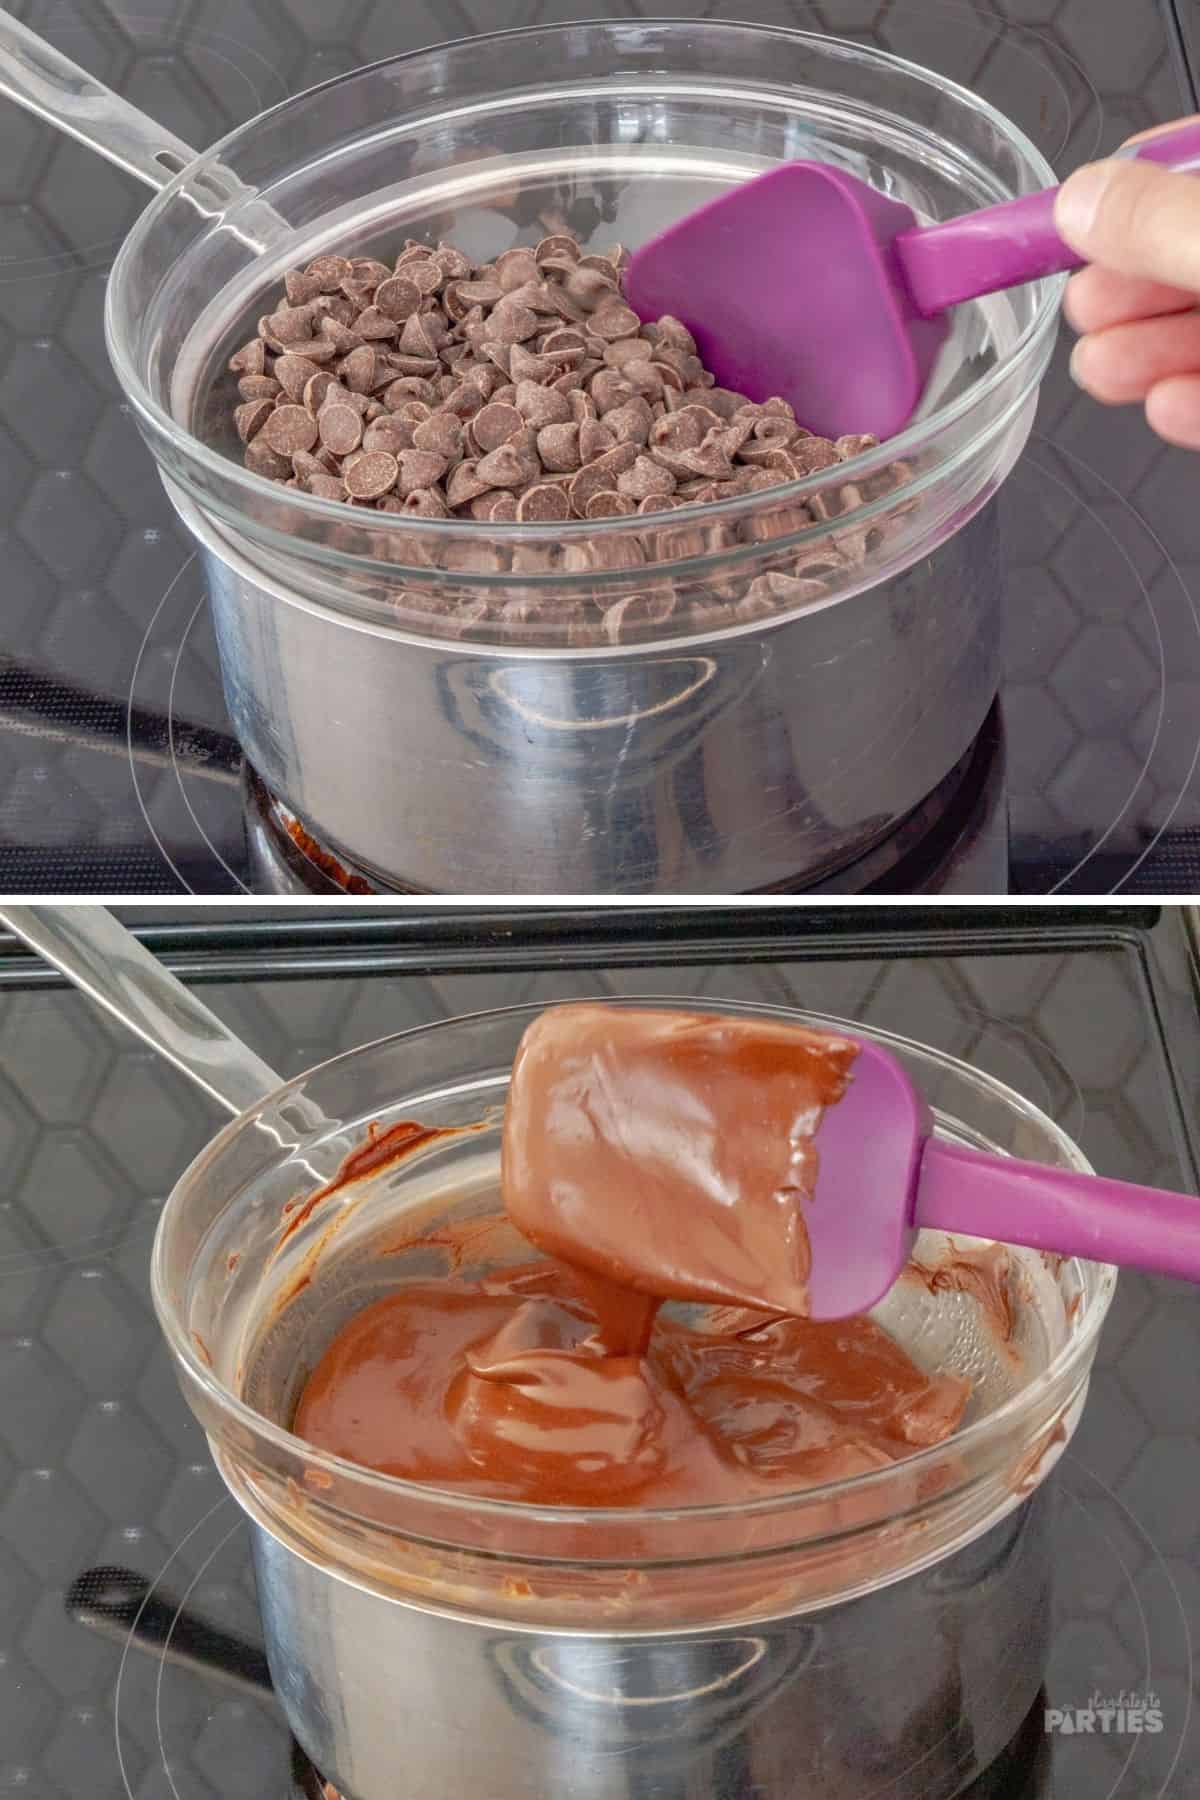 A DIY double boiler with semi sweet chocolate chips before and after melting.